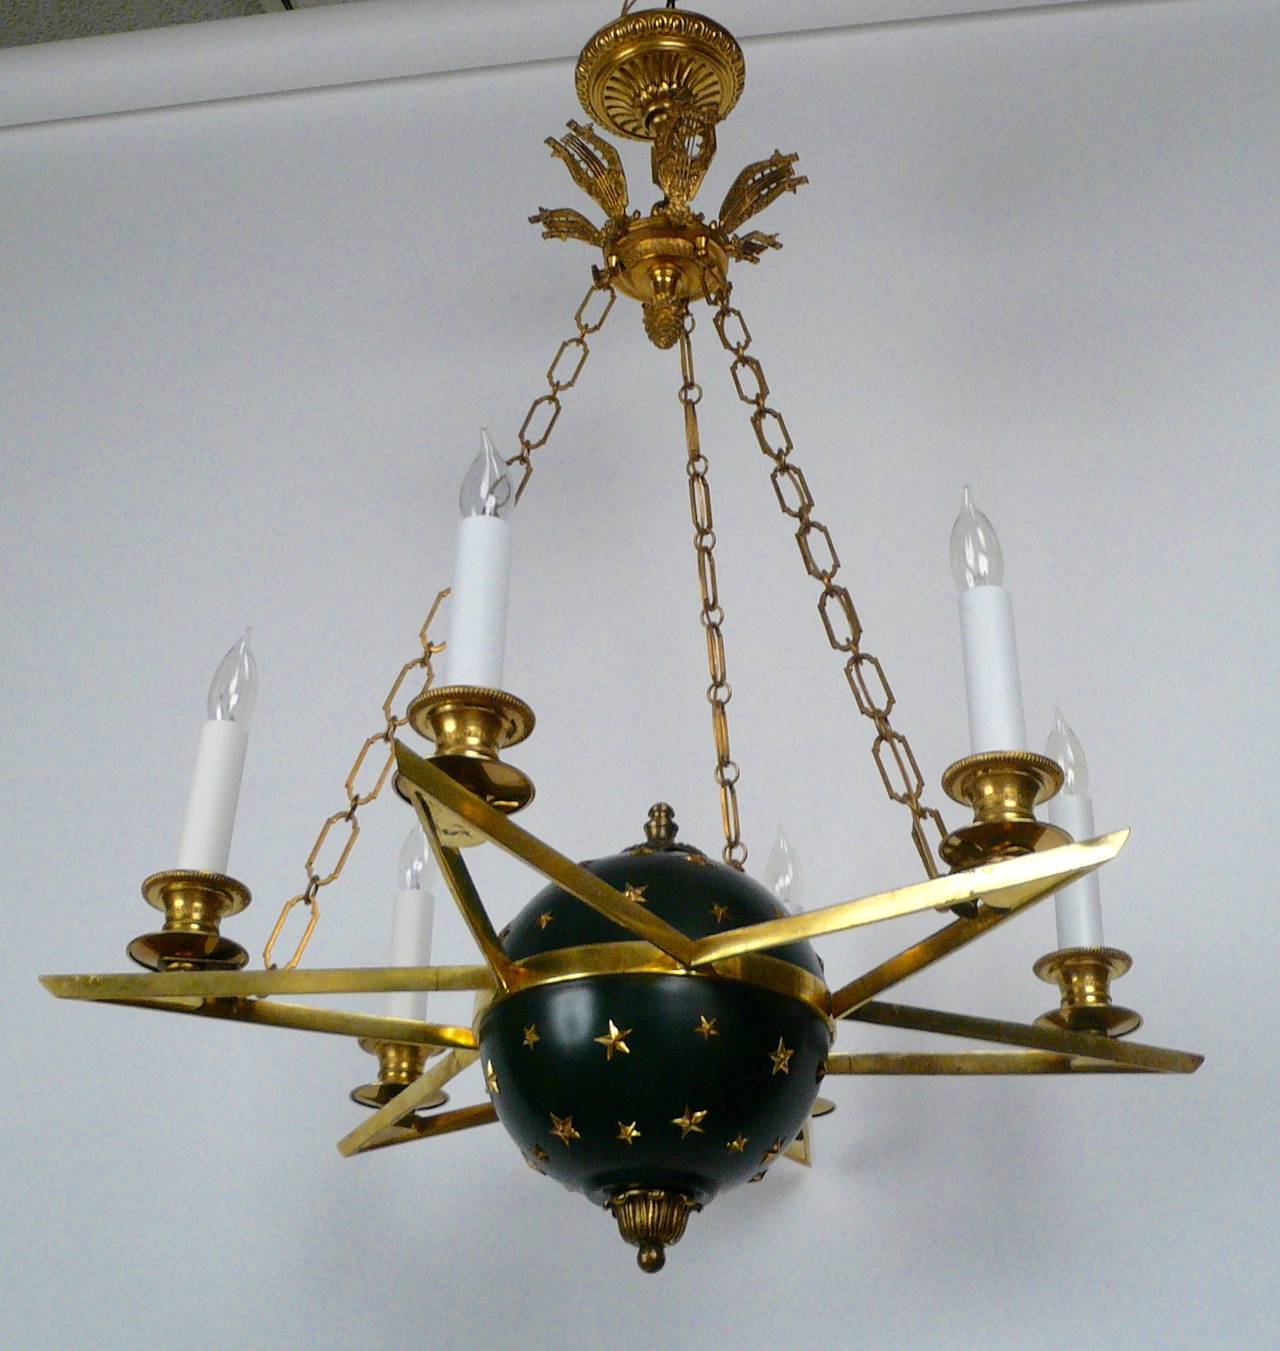 This patinated and gilt bronze six-light Empire style chandelier with celestial motifs, is by the pre-eminent American maker, Edward F. Caldwell.